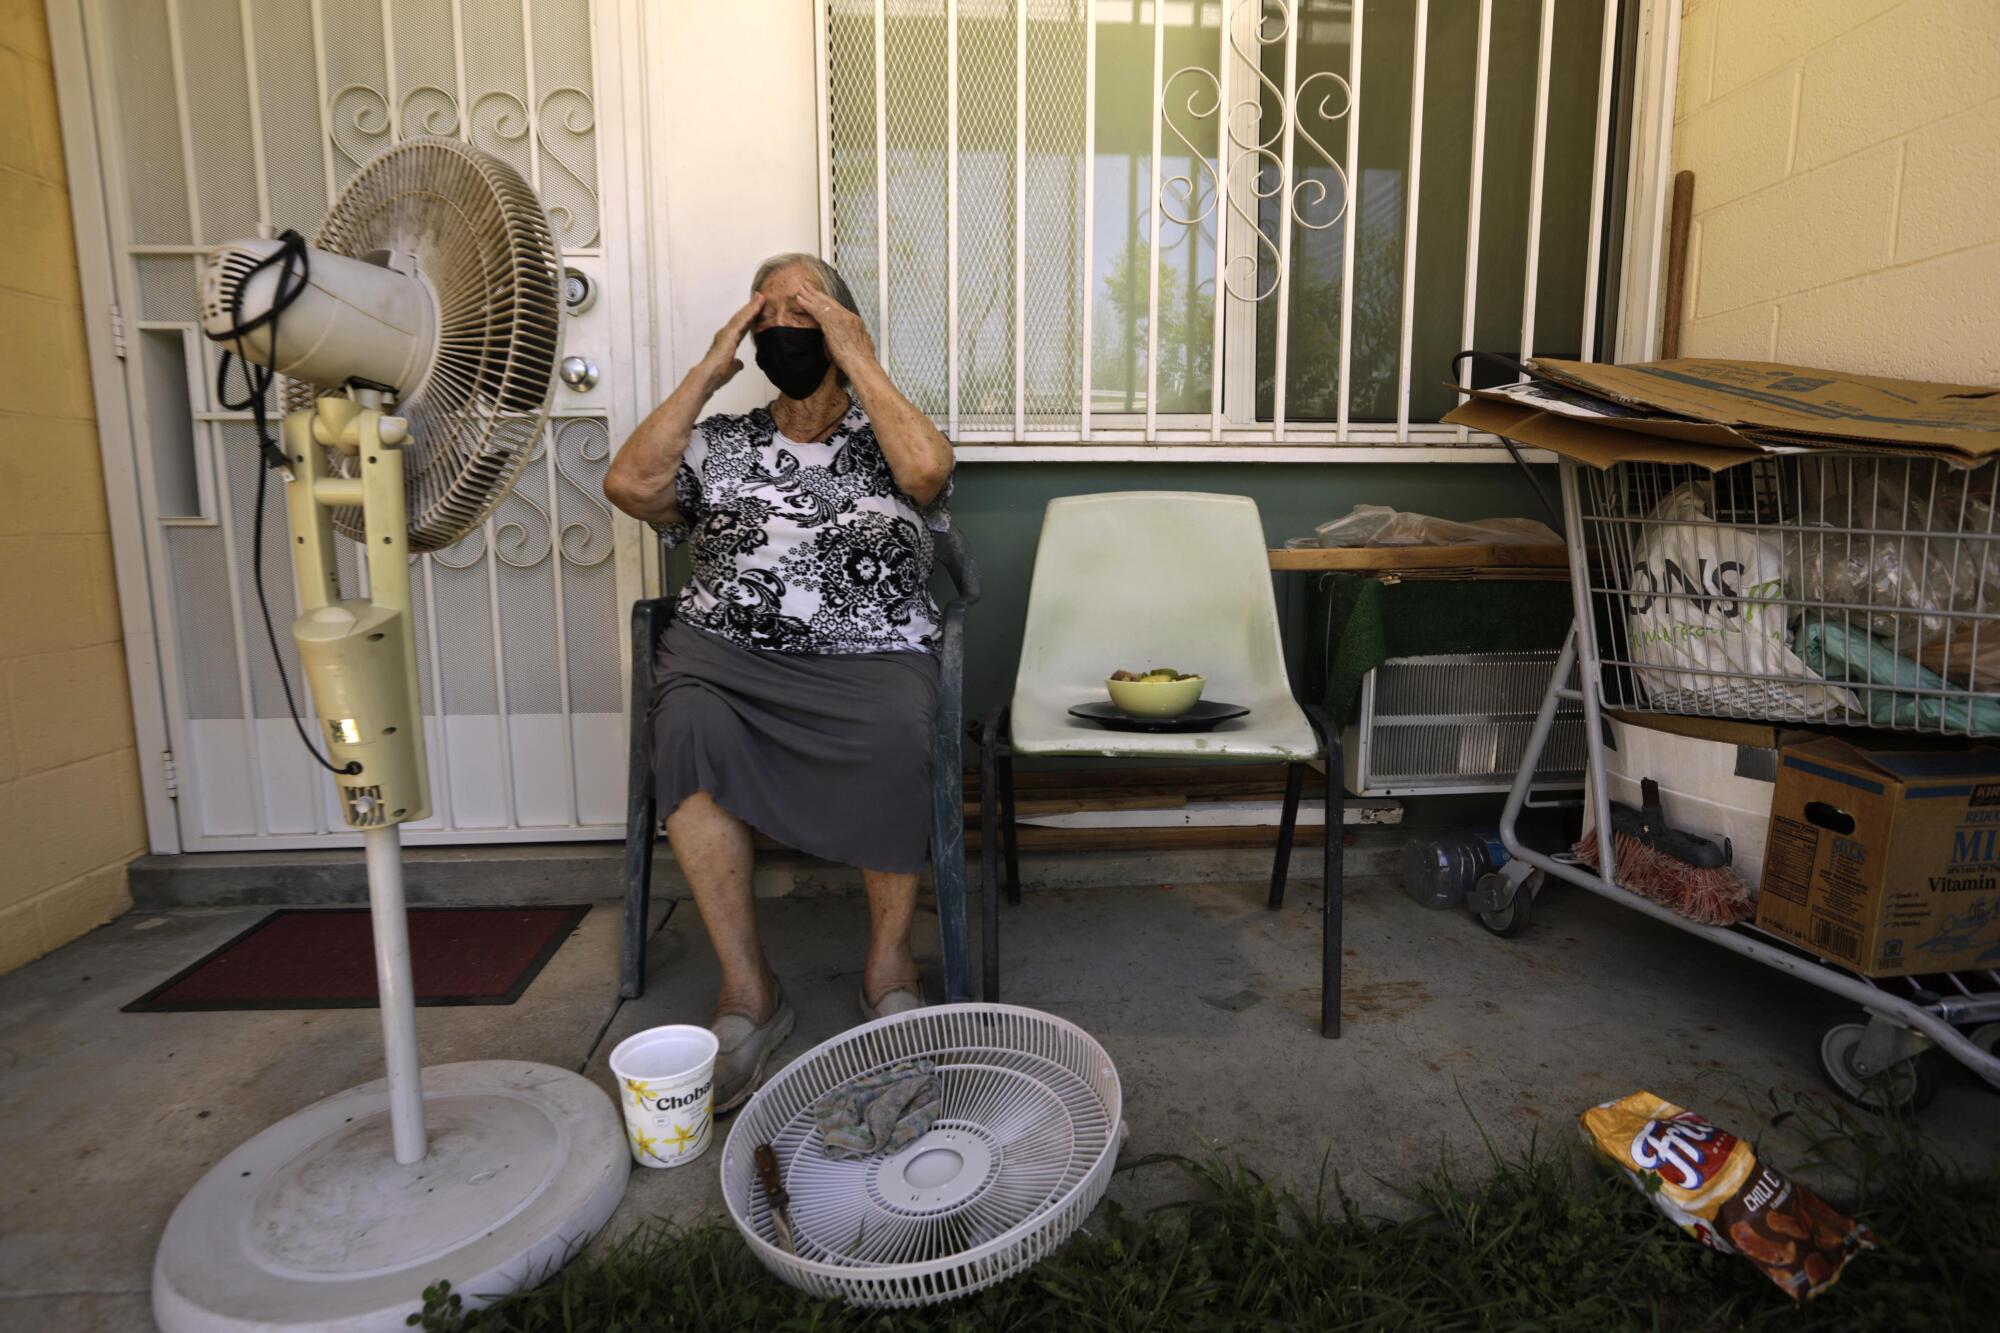 Felisa Benitez wipes the sweat from her brow while taking a break from cleaning her stand-up electrical fan in Pacoima